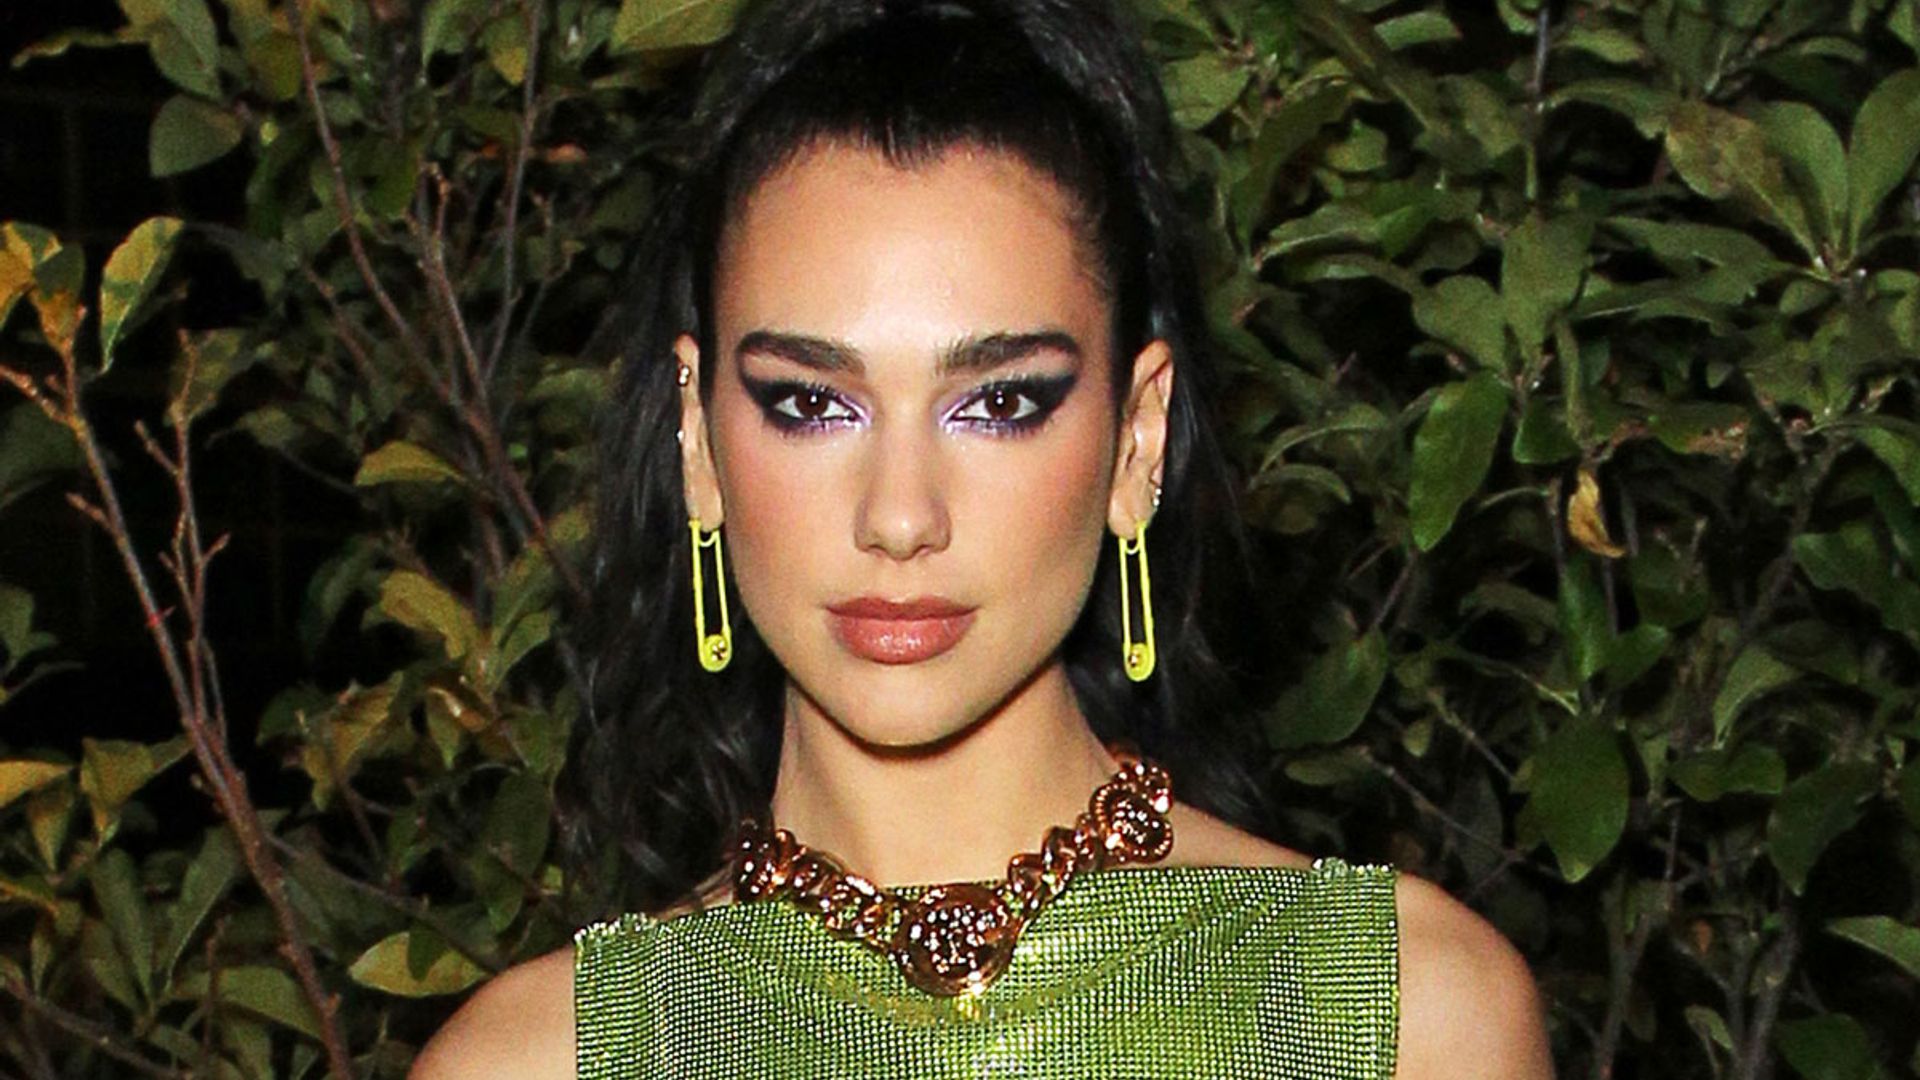 Dua Lipa levels up her look in leather mini dress and thigh-high boots